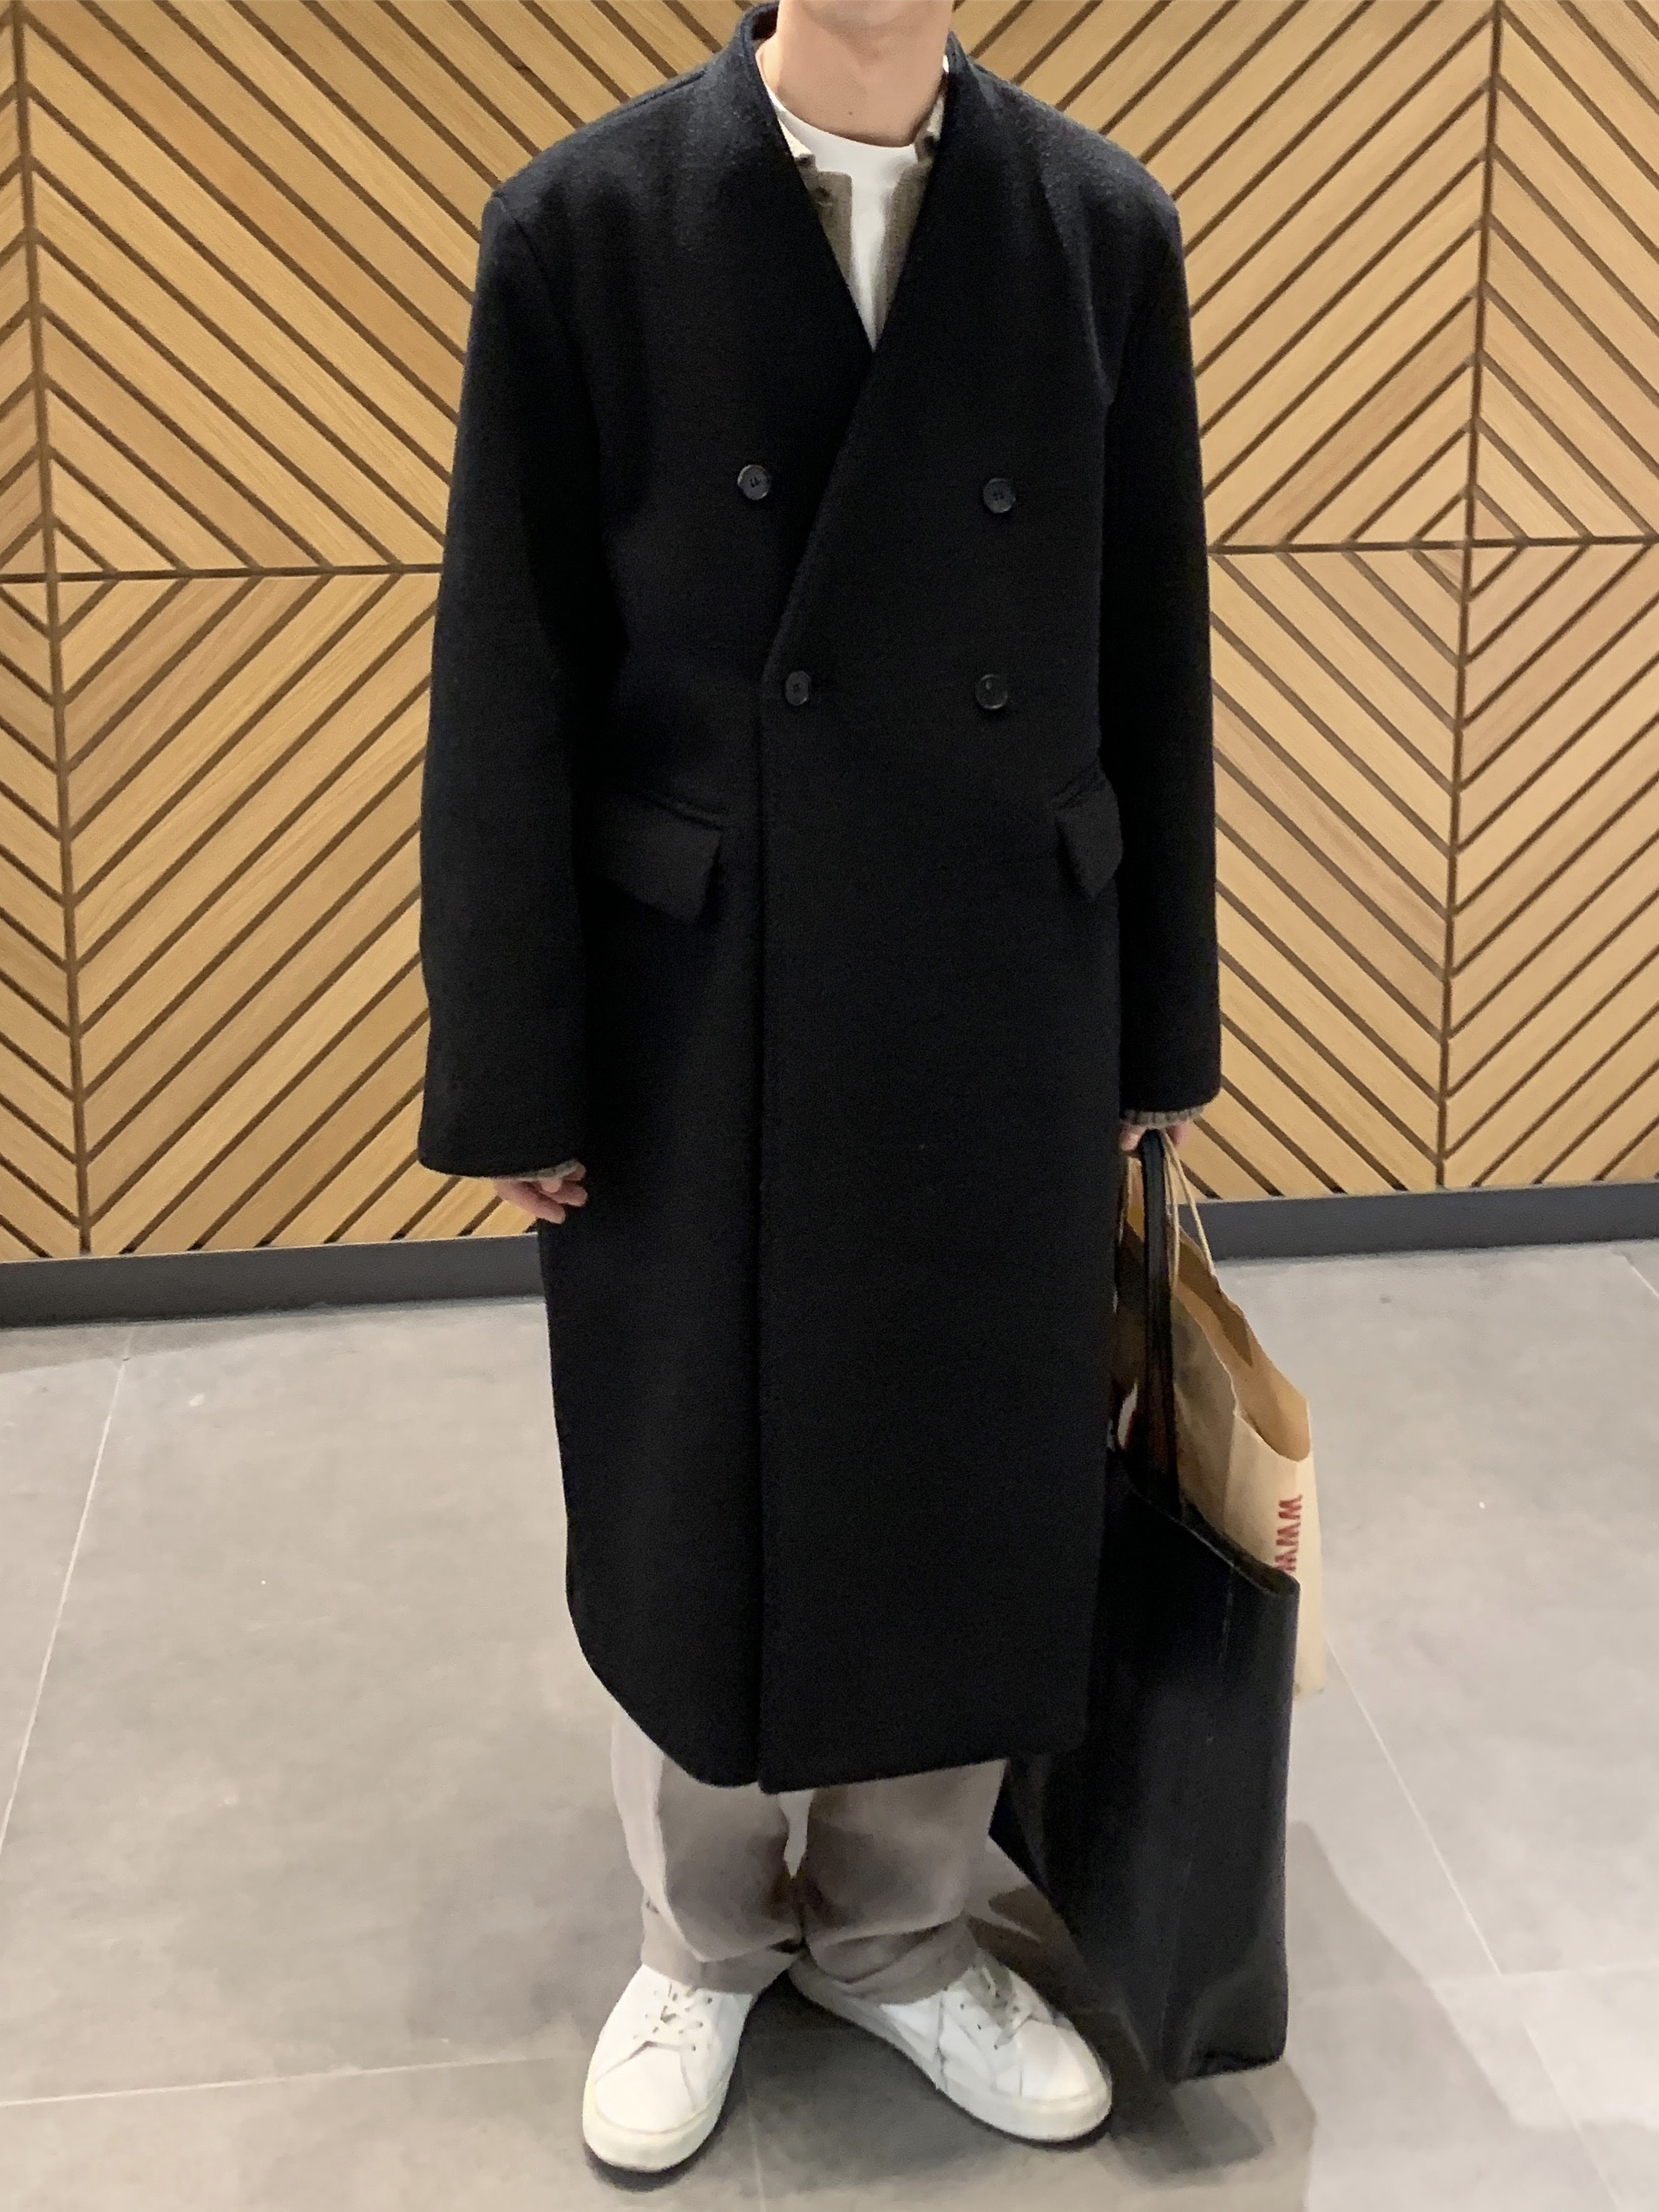 Nt semiover collarless double coat